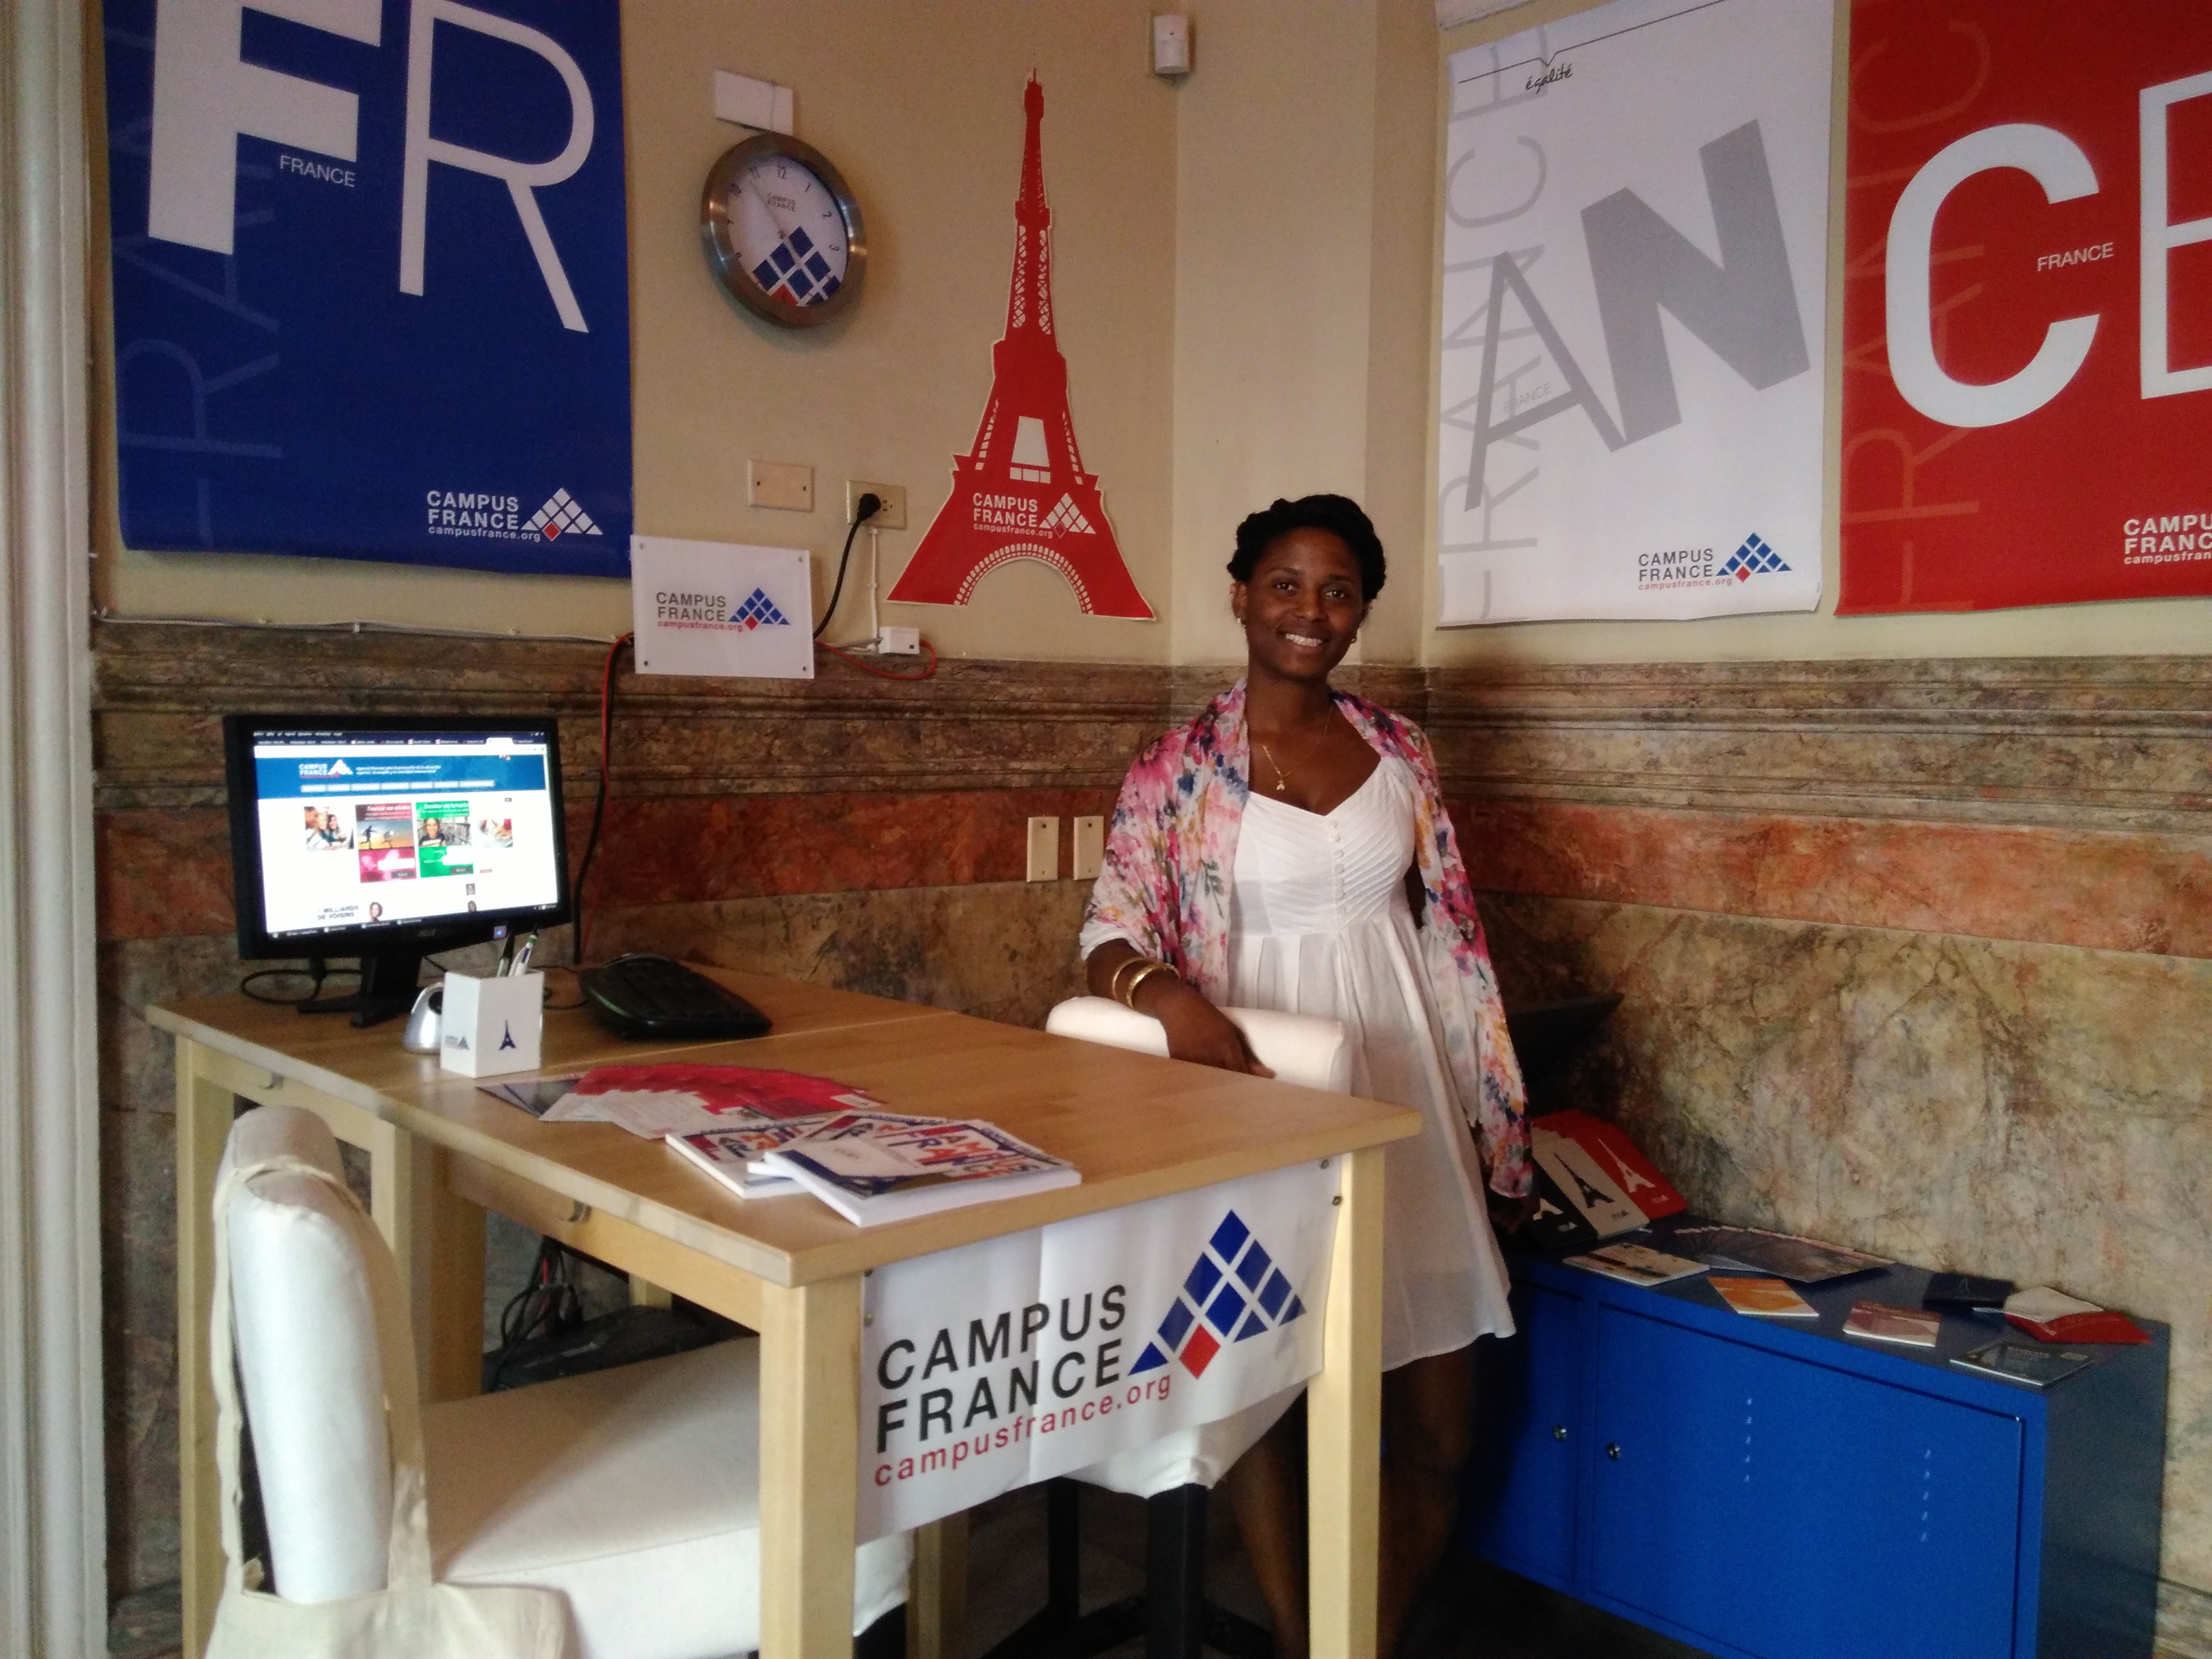 Contact your Campus France office  Campus France